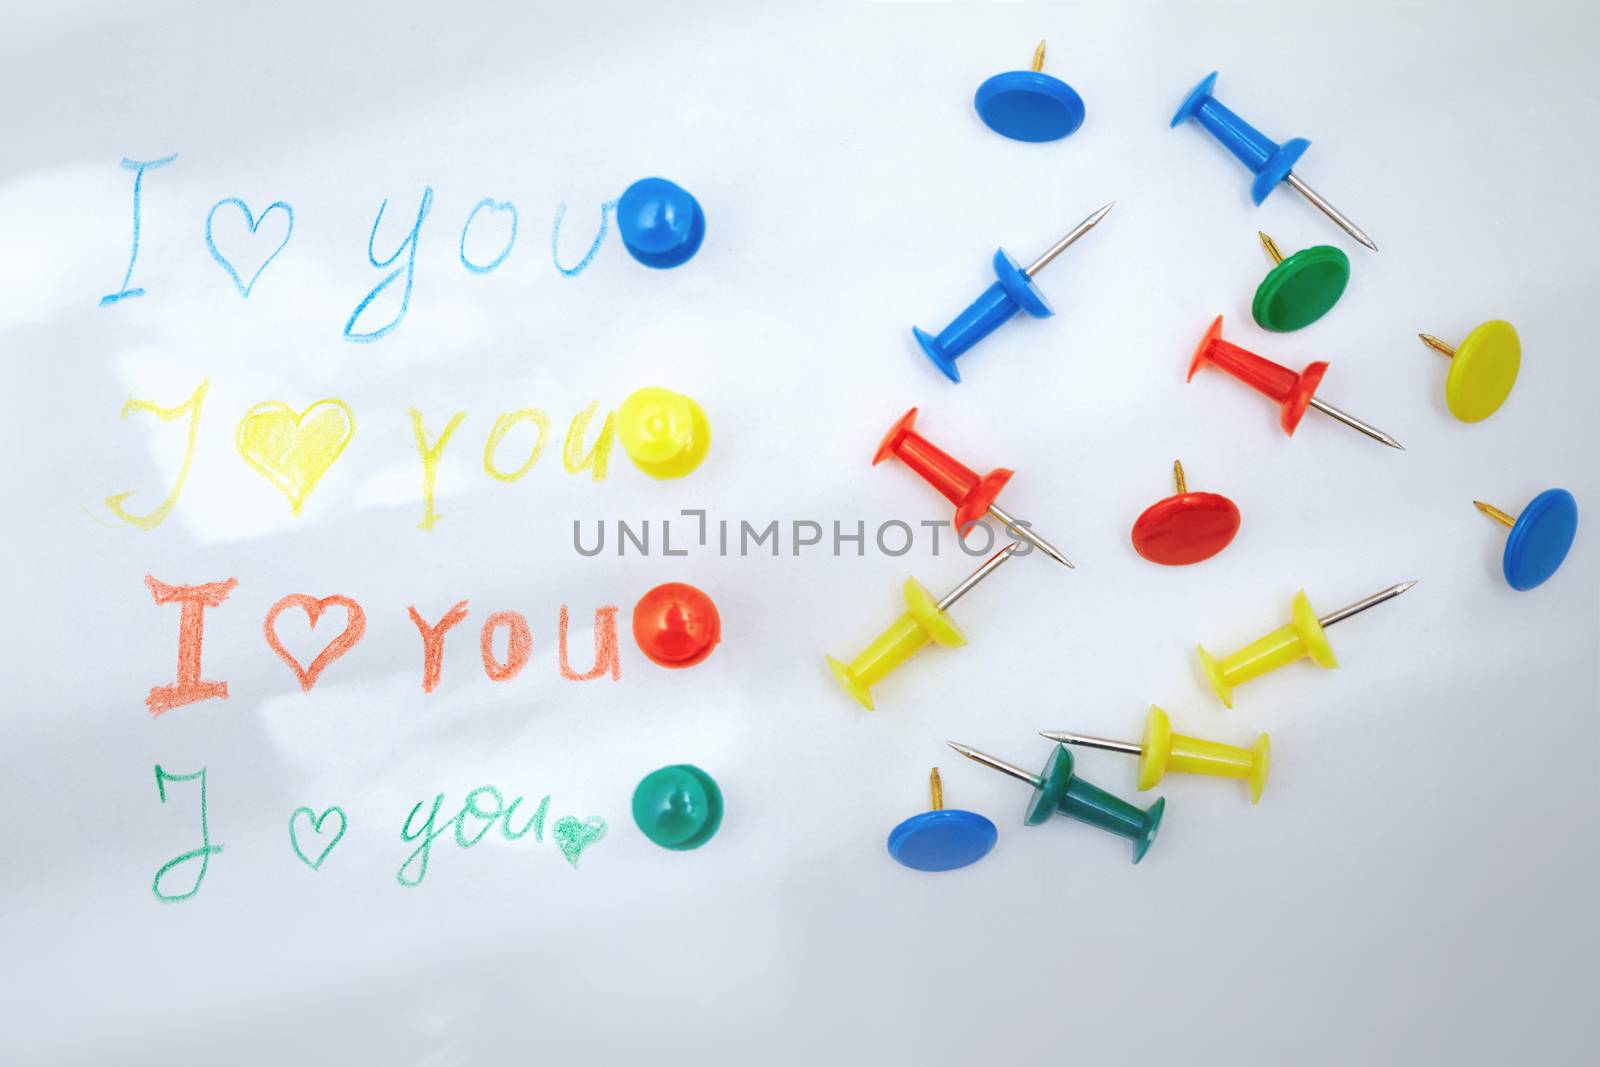 Love you letter with colorful push pins. Sunlight shadows and flare